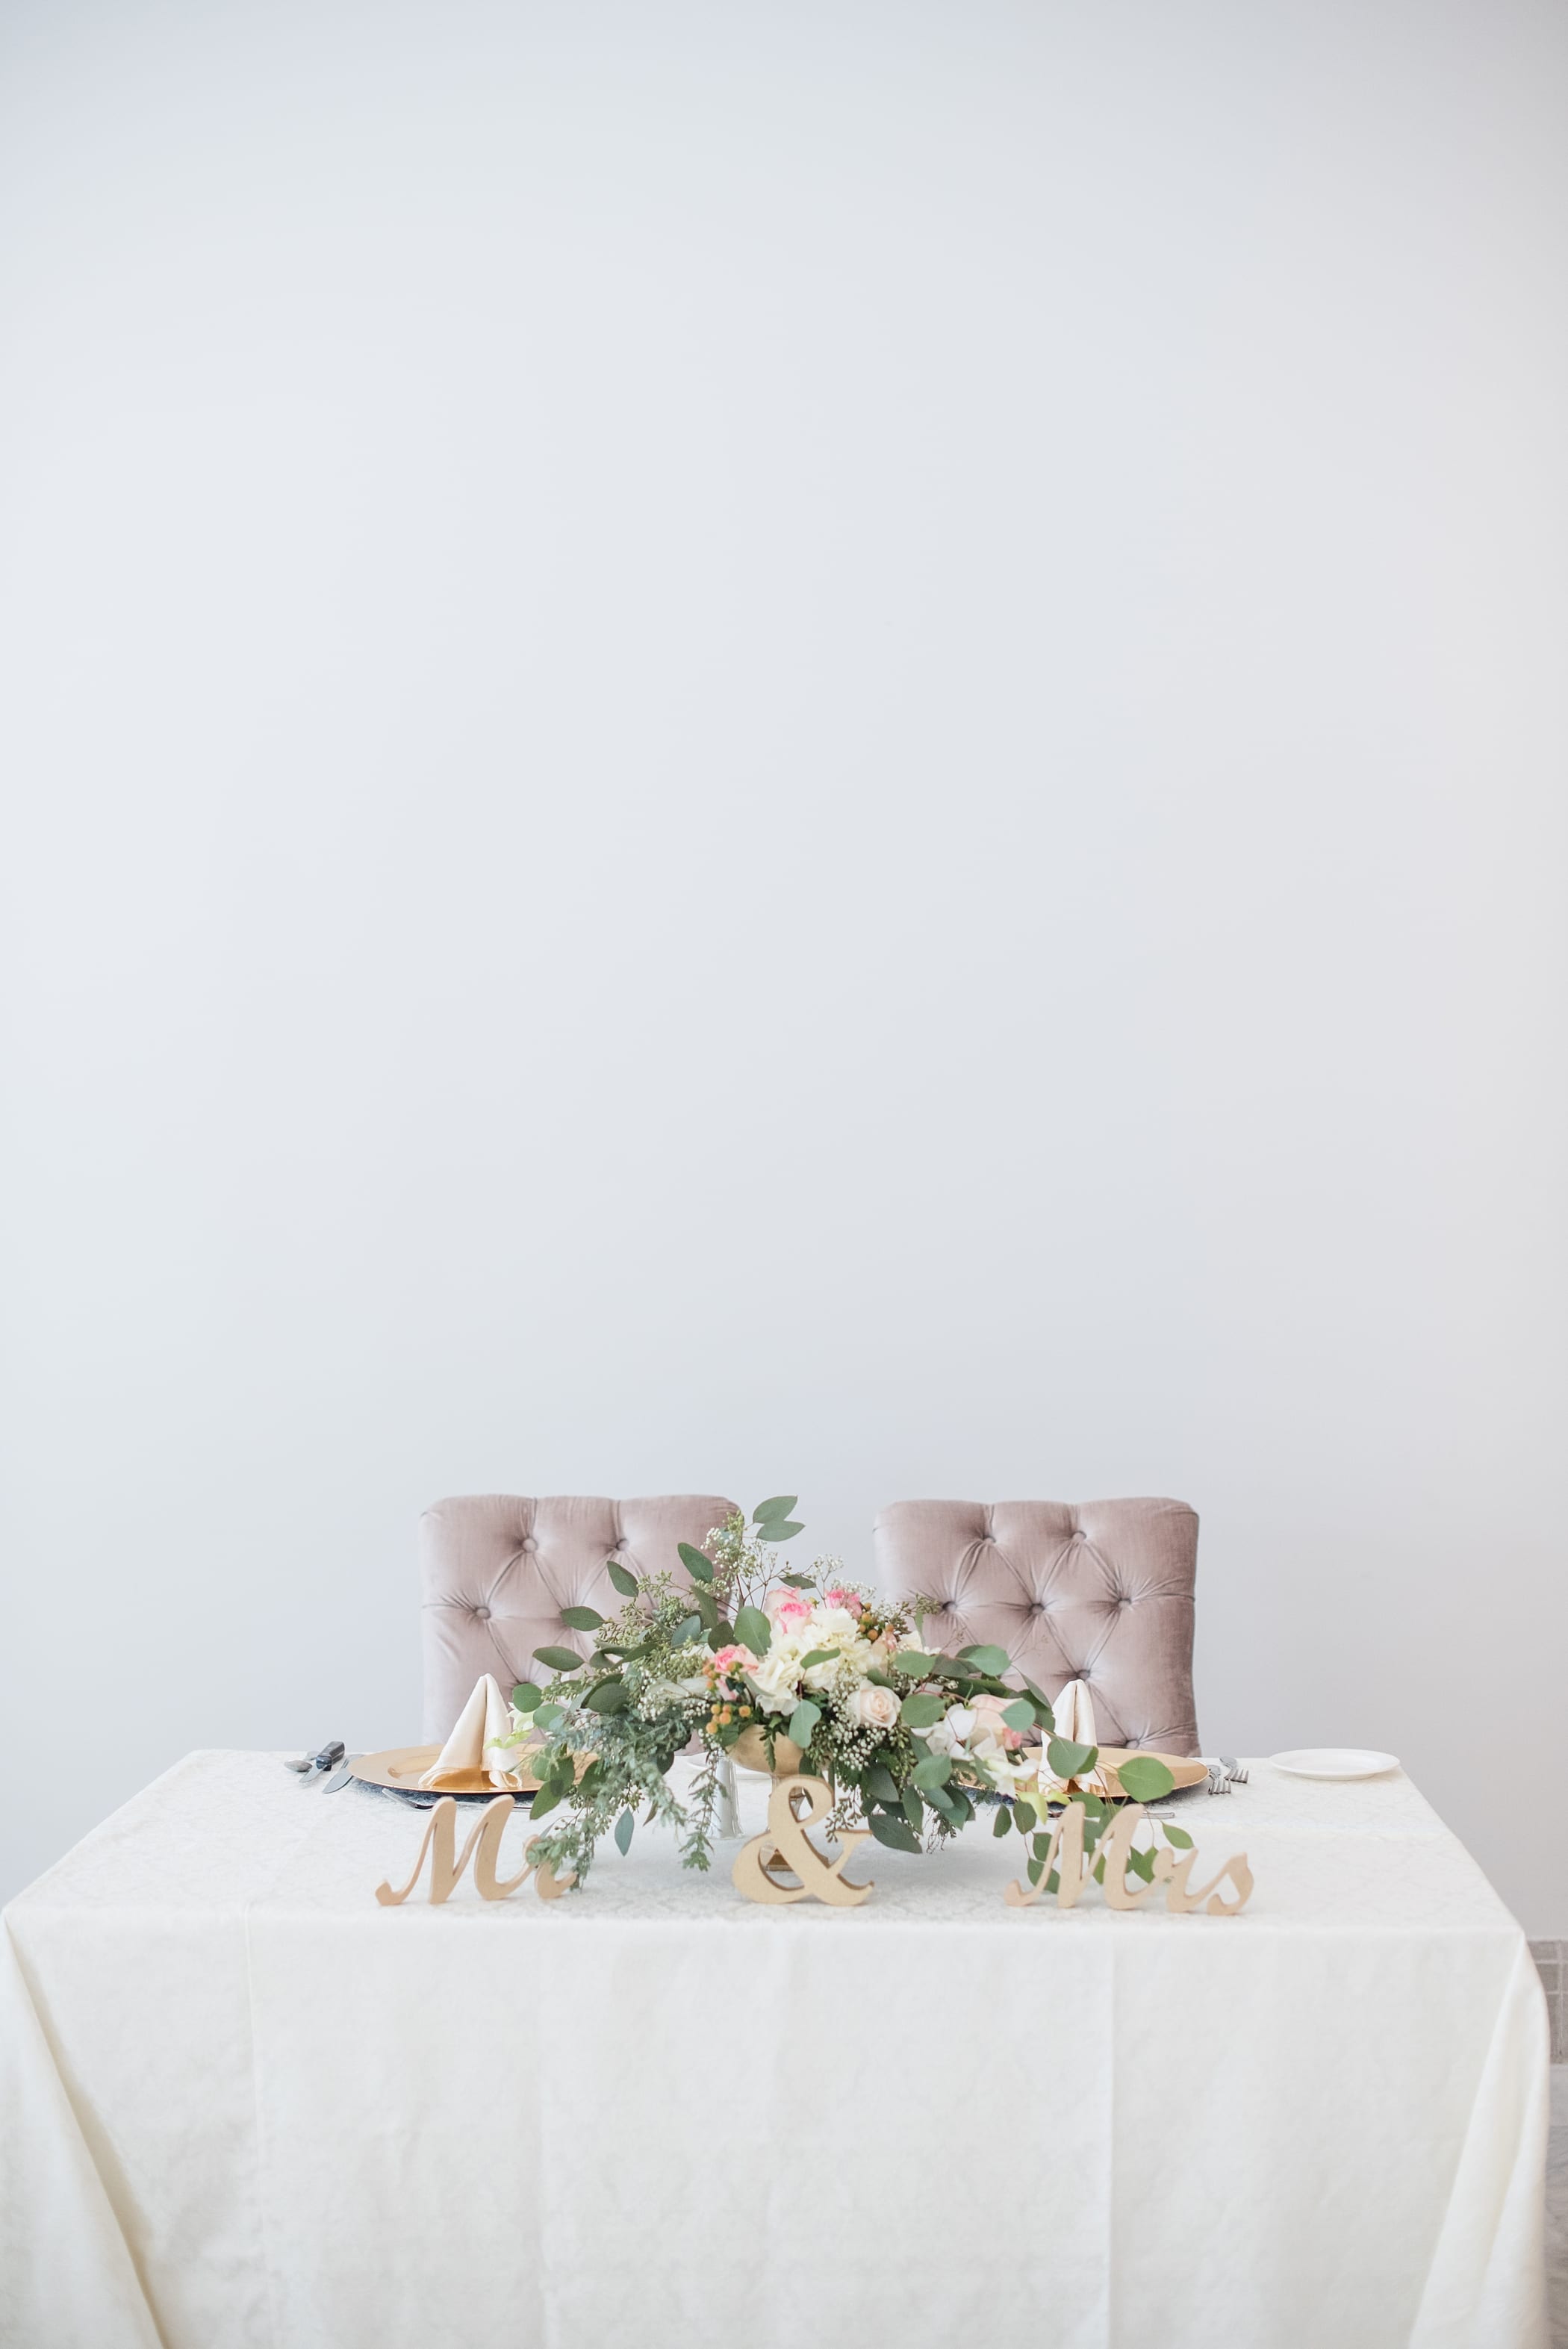 Blush, white, and gold wedding at The Chateau des Fleurs by Michelle & Logan Photo+Films